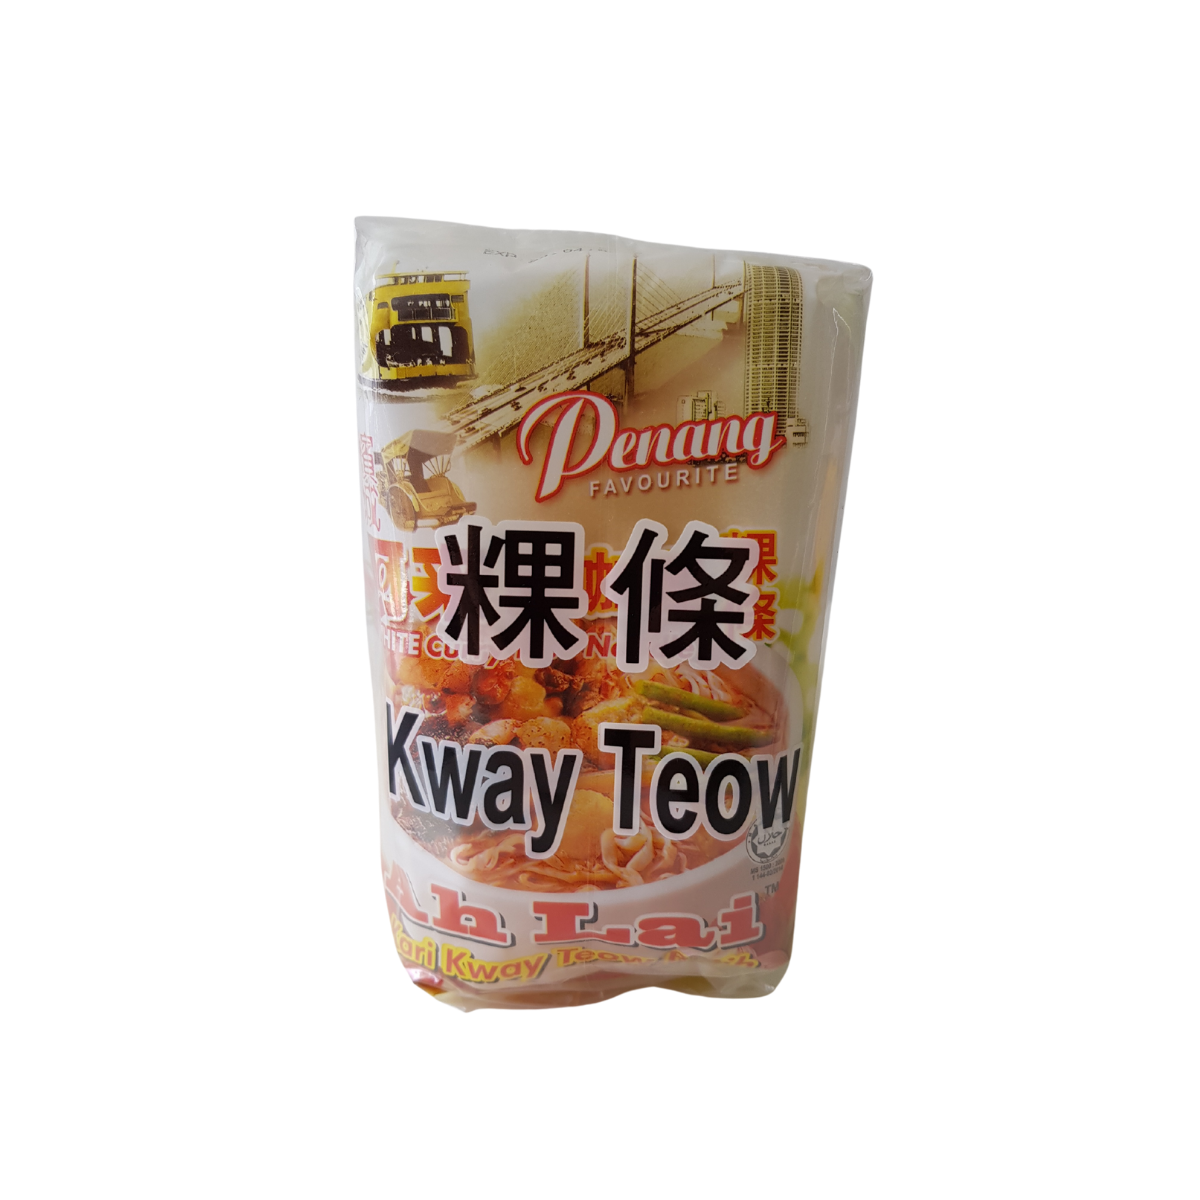 Ah Lai Penang White Curry Kway Teow 4x95g Pack